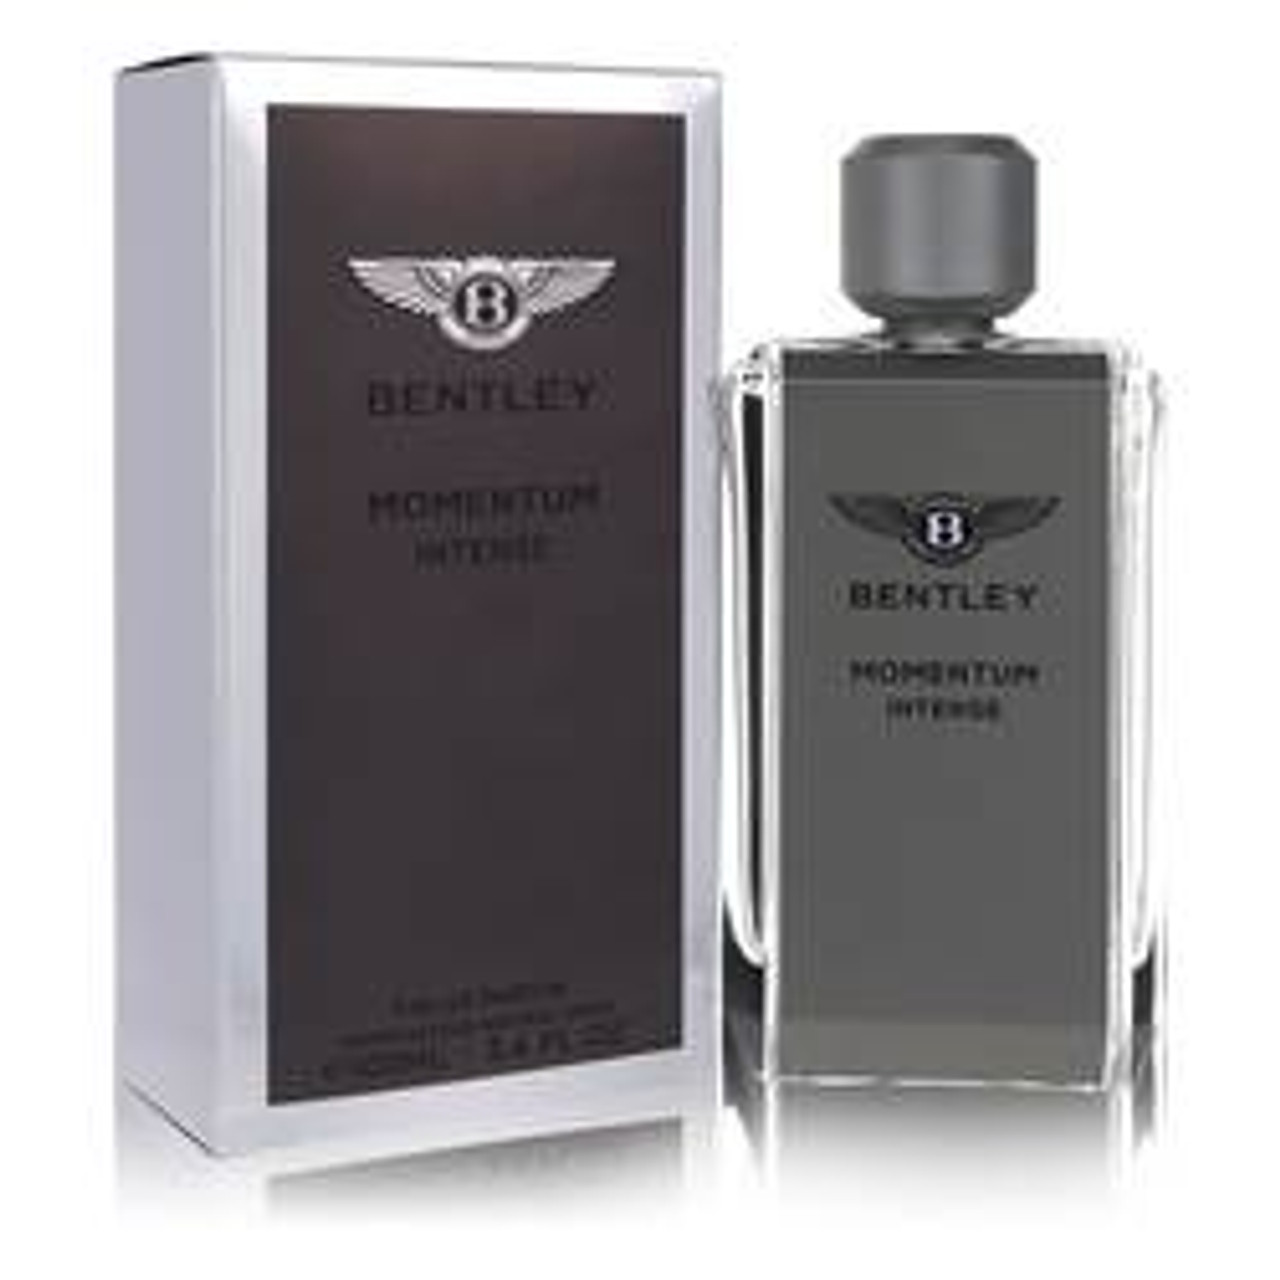 Bentley Momentum Intense Cologne By Bentley Eau De Parfum Spray 3.4 oz for Men - [From 128.00 - Choose pk Qty ] - *Ships from Miami